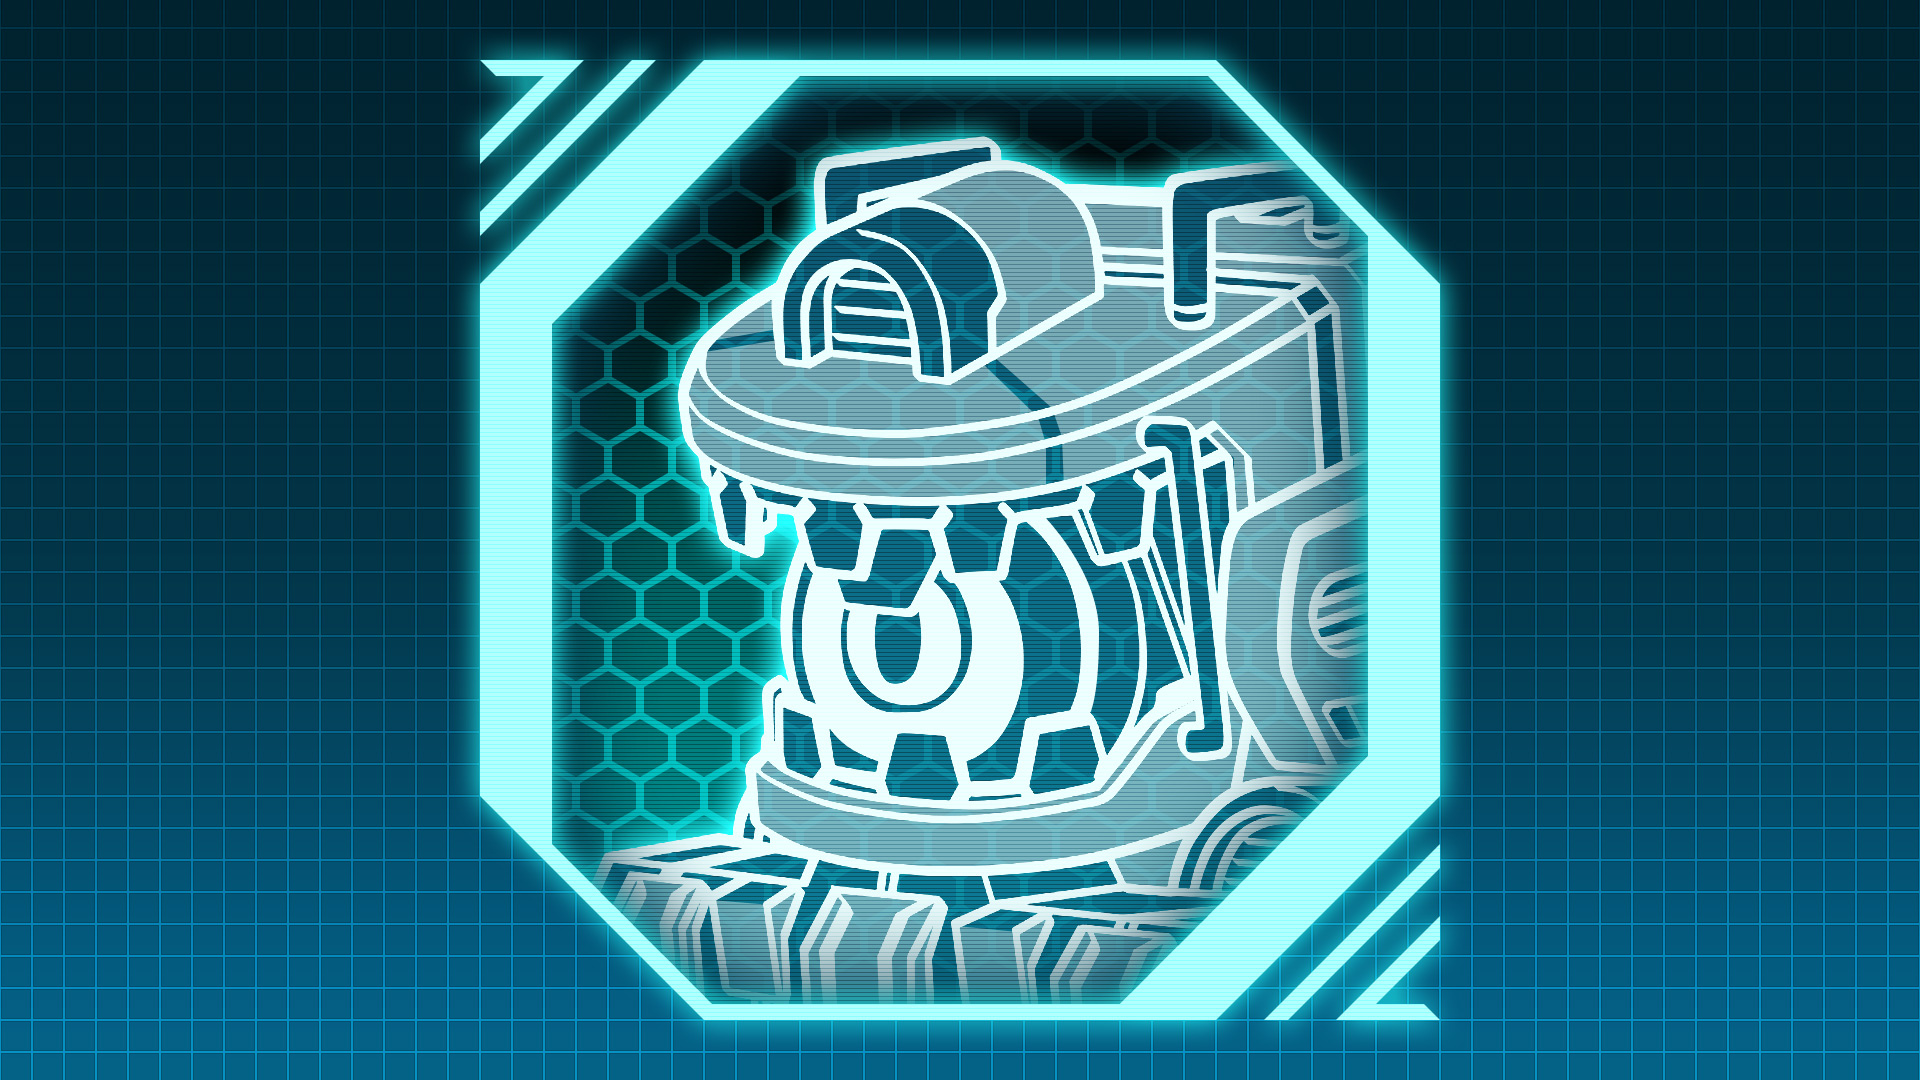 Icon for FINE PLAY! (Robot Factory Boss)